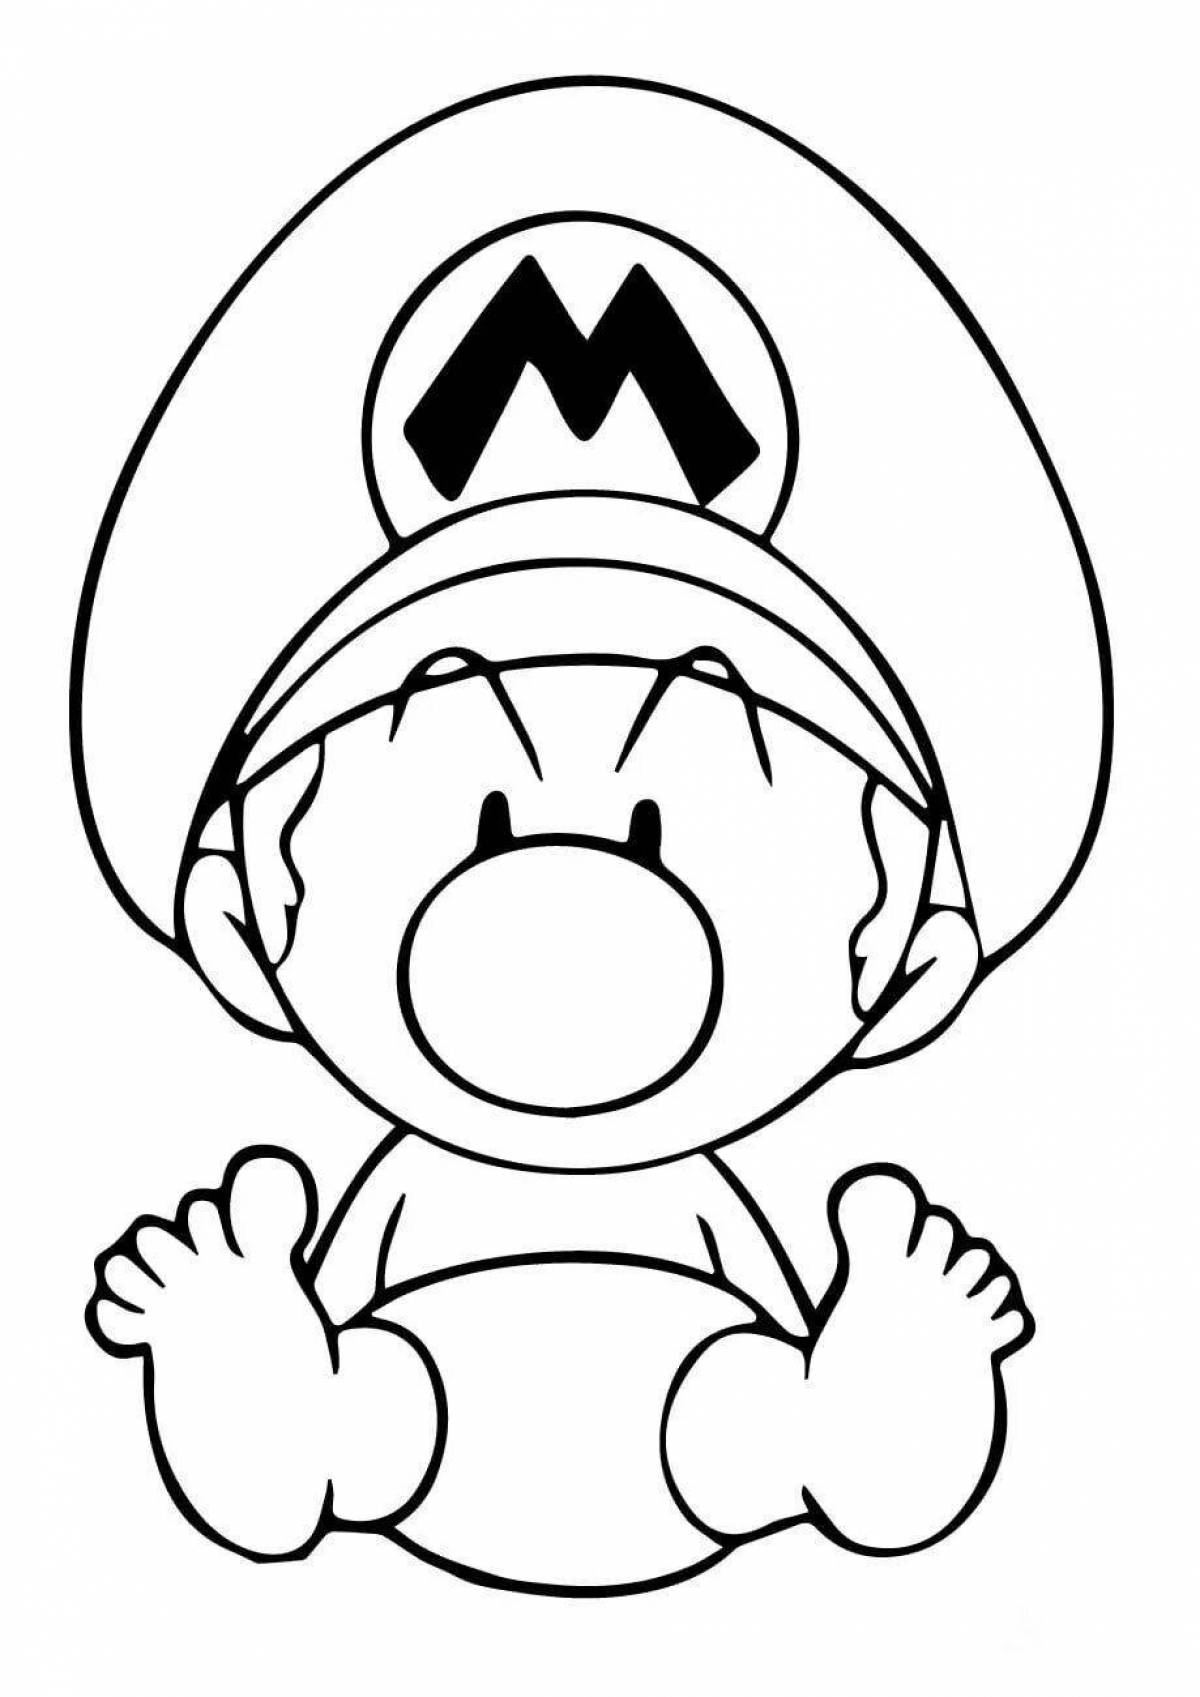 Mario for kids #2